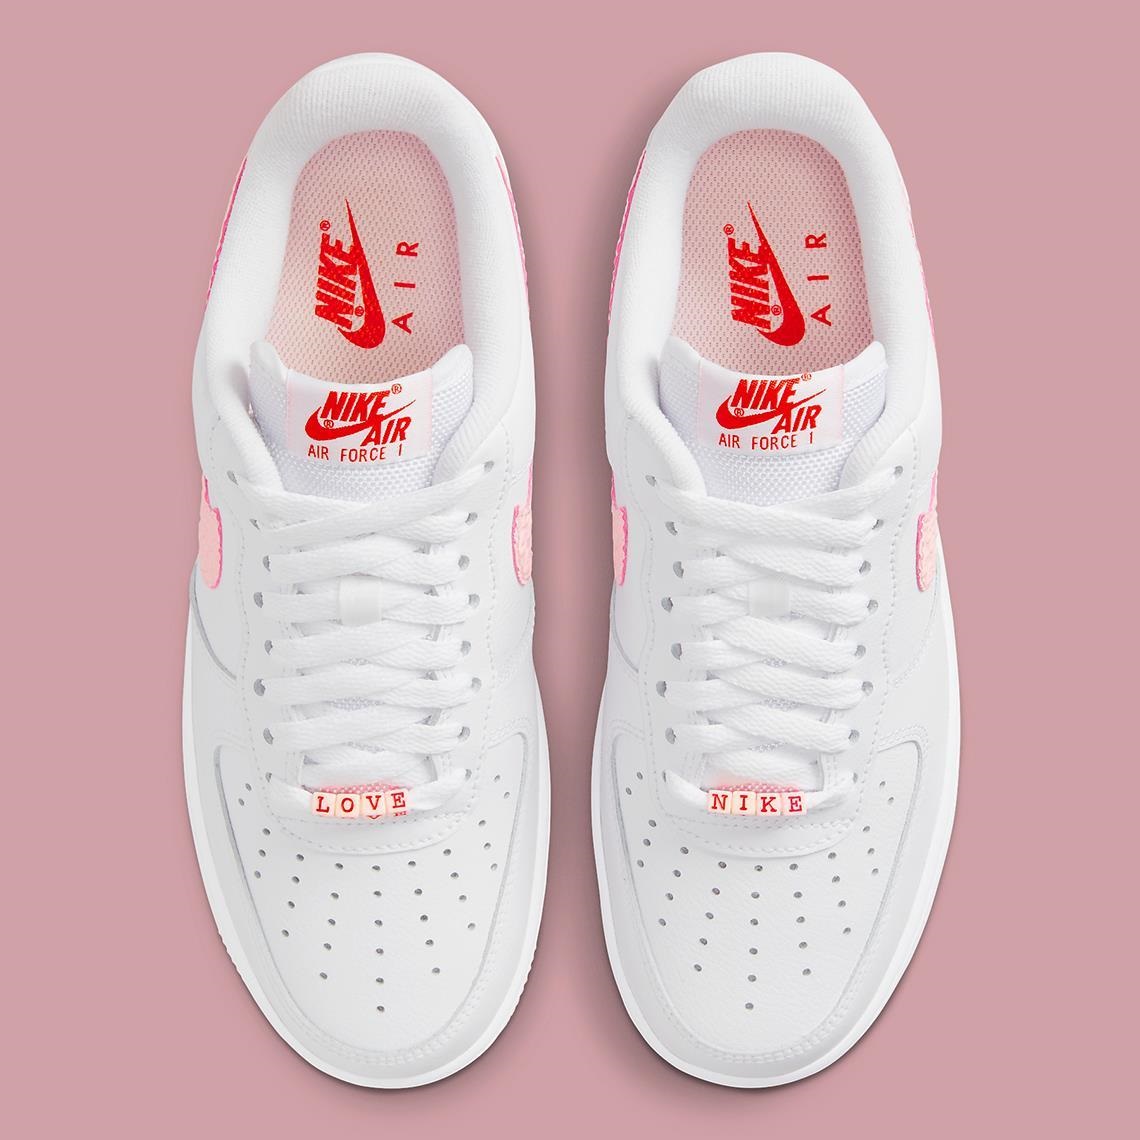 GIÀY THỂ THAO NỮ NIKE AIR FORCE 1 07 LOW VD VALENTINE´S DAY WHITE ATMOSPHERE UNIVERSITY RED SAIL DQ9320-100 19